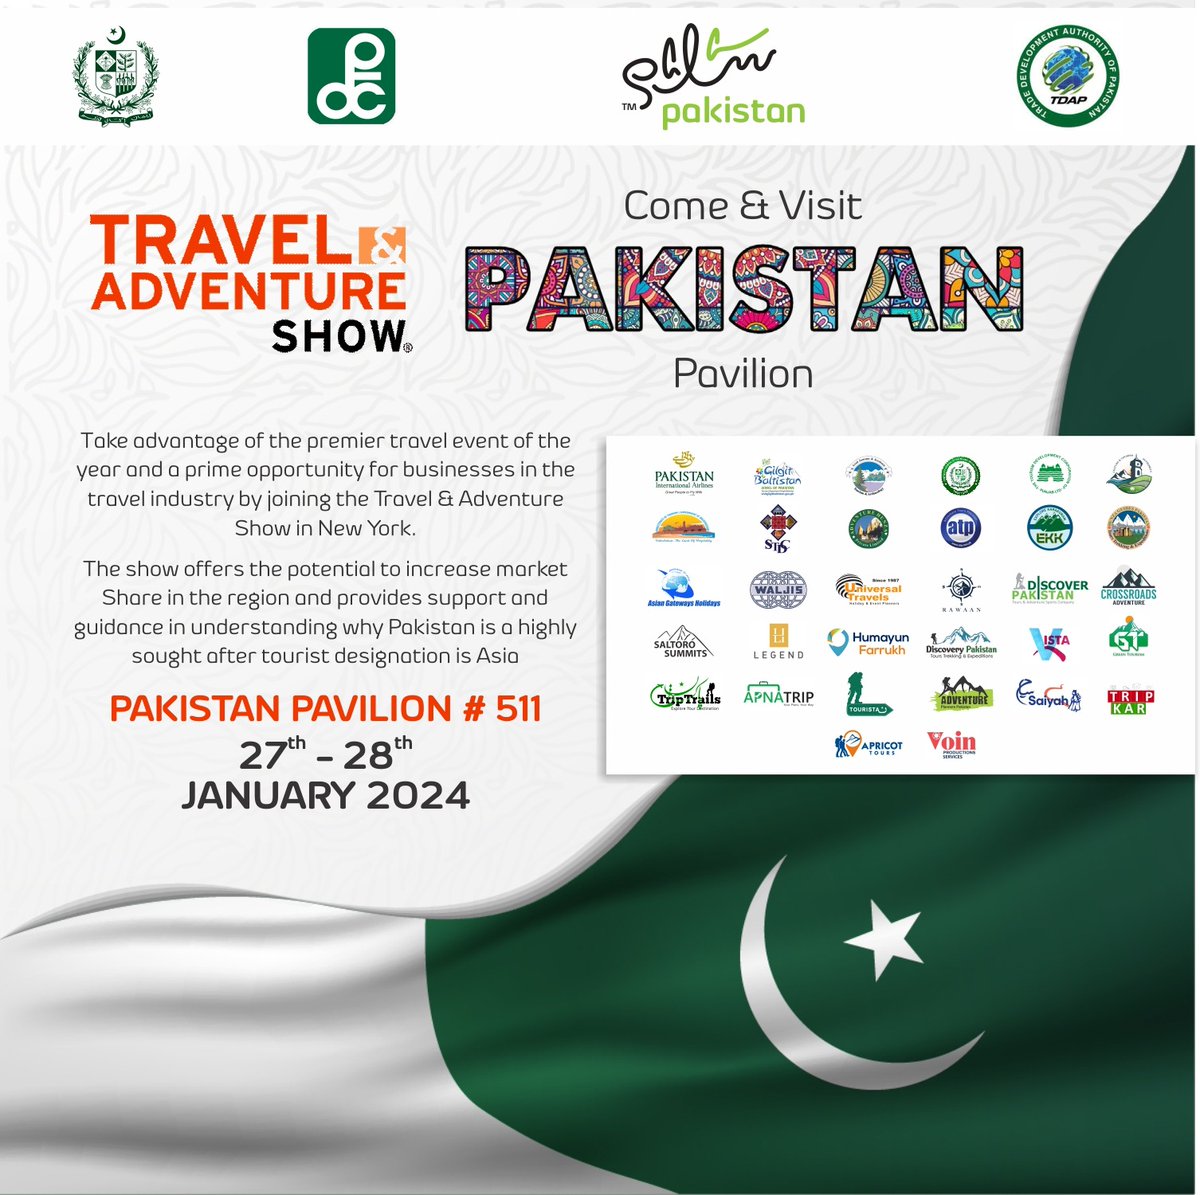 Discover the wonders of Pakistan at the Travel & Adventure Show in New York on Jan 27-28! 🇵🇰 Join us at Stand 511 & 500 for an immersive experience showcasing our breathtaking destinations. Attend/visit us on Sat (10am–5pm) & Sun (11am–4pm). Don't miss out! #SalamPakistan #PTDC